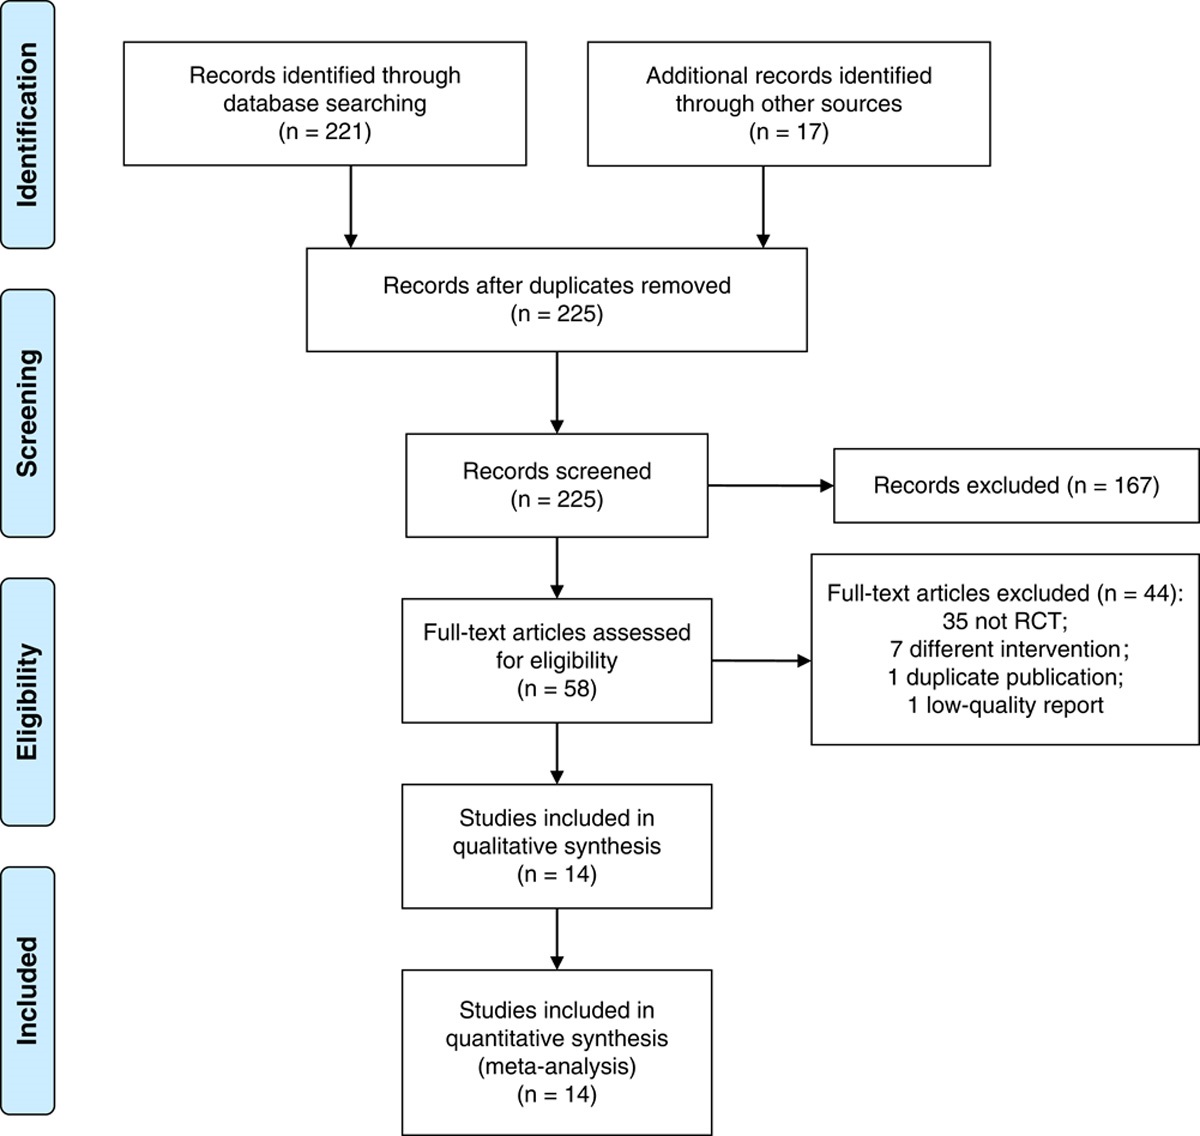 Laparoscopic Versus Abdominal Radical Hysterectomy for Cervical Cancer: A Meta-analysis of Randomized Controlled Trials